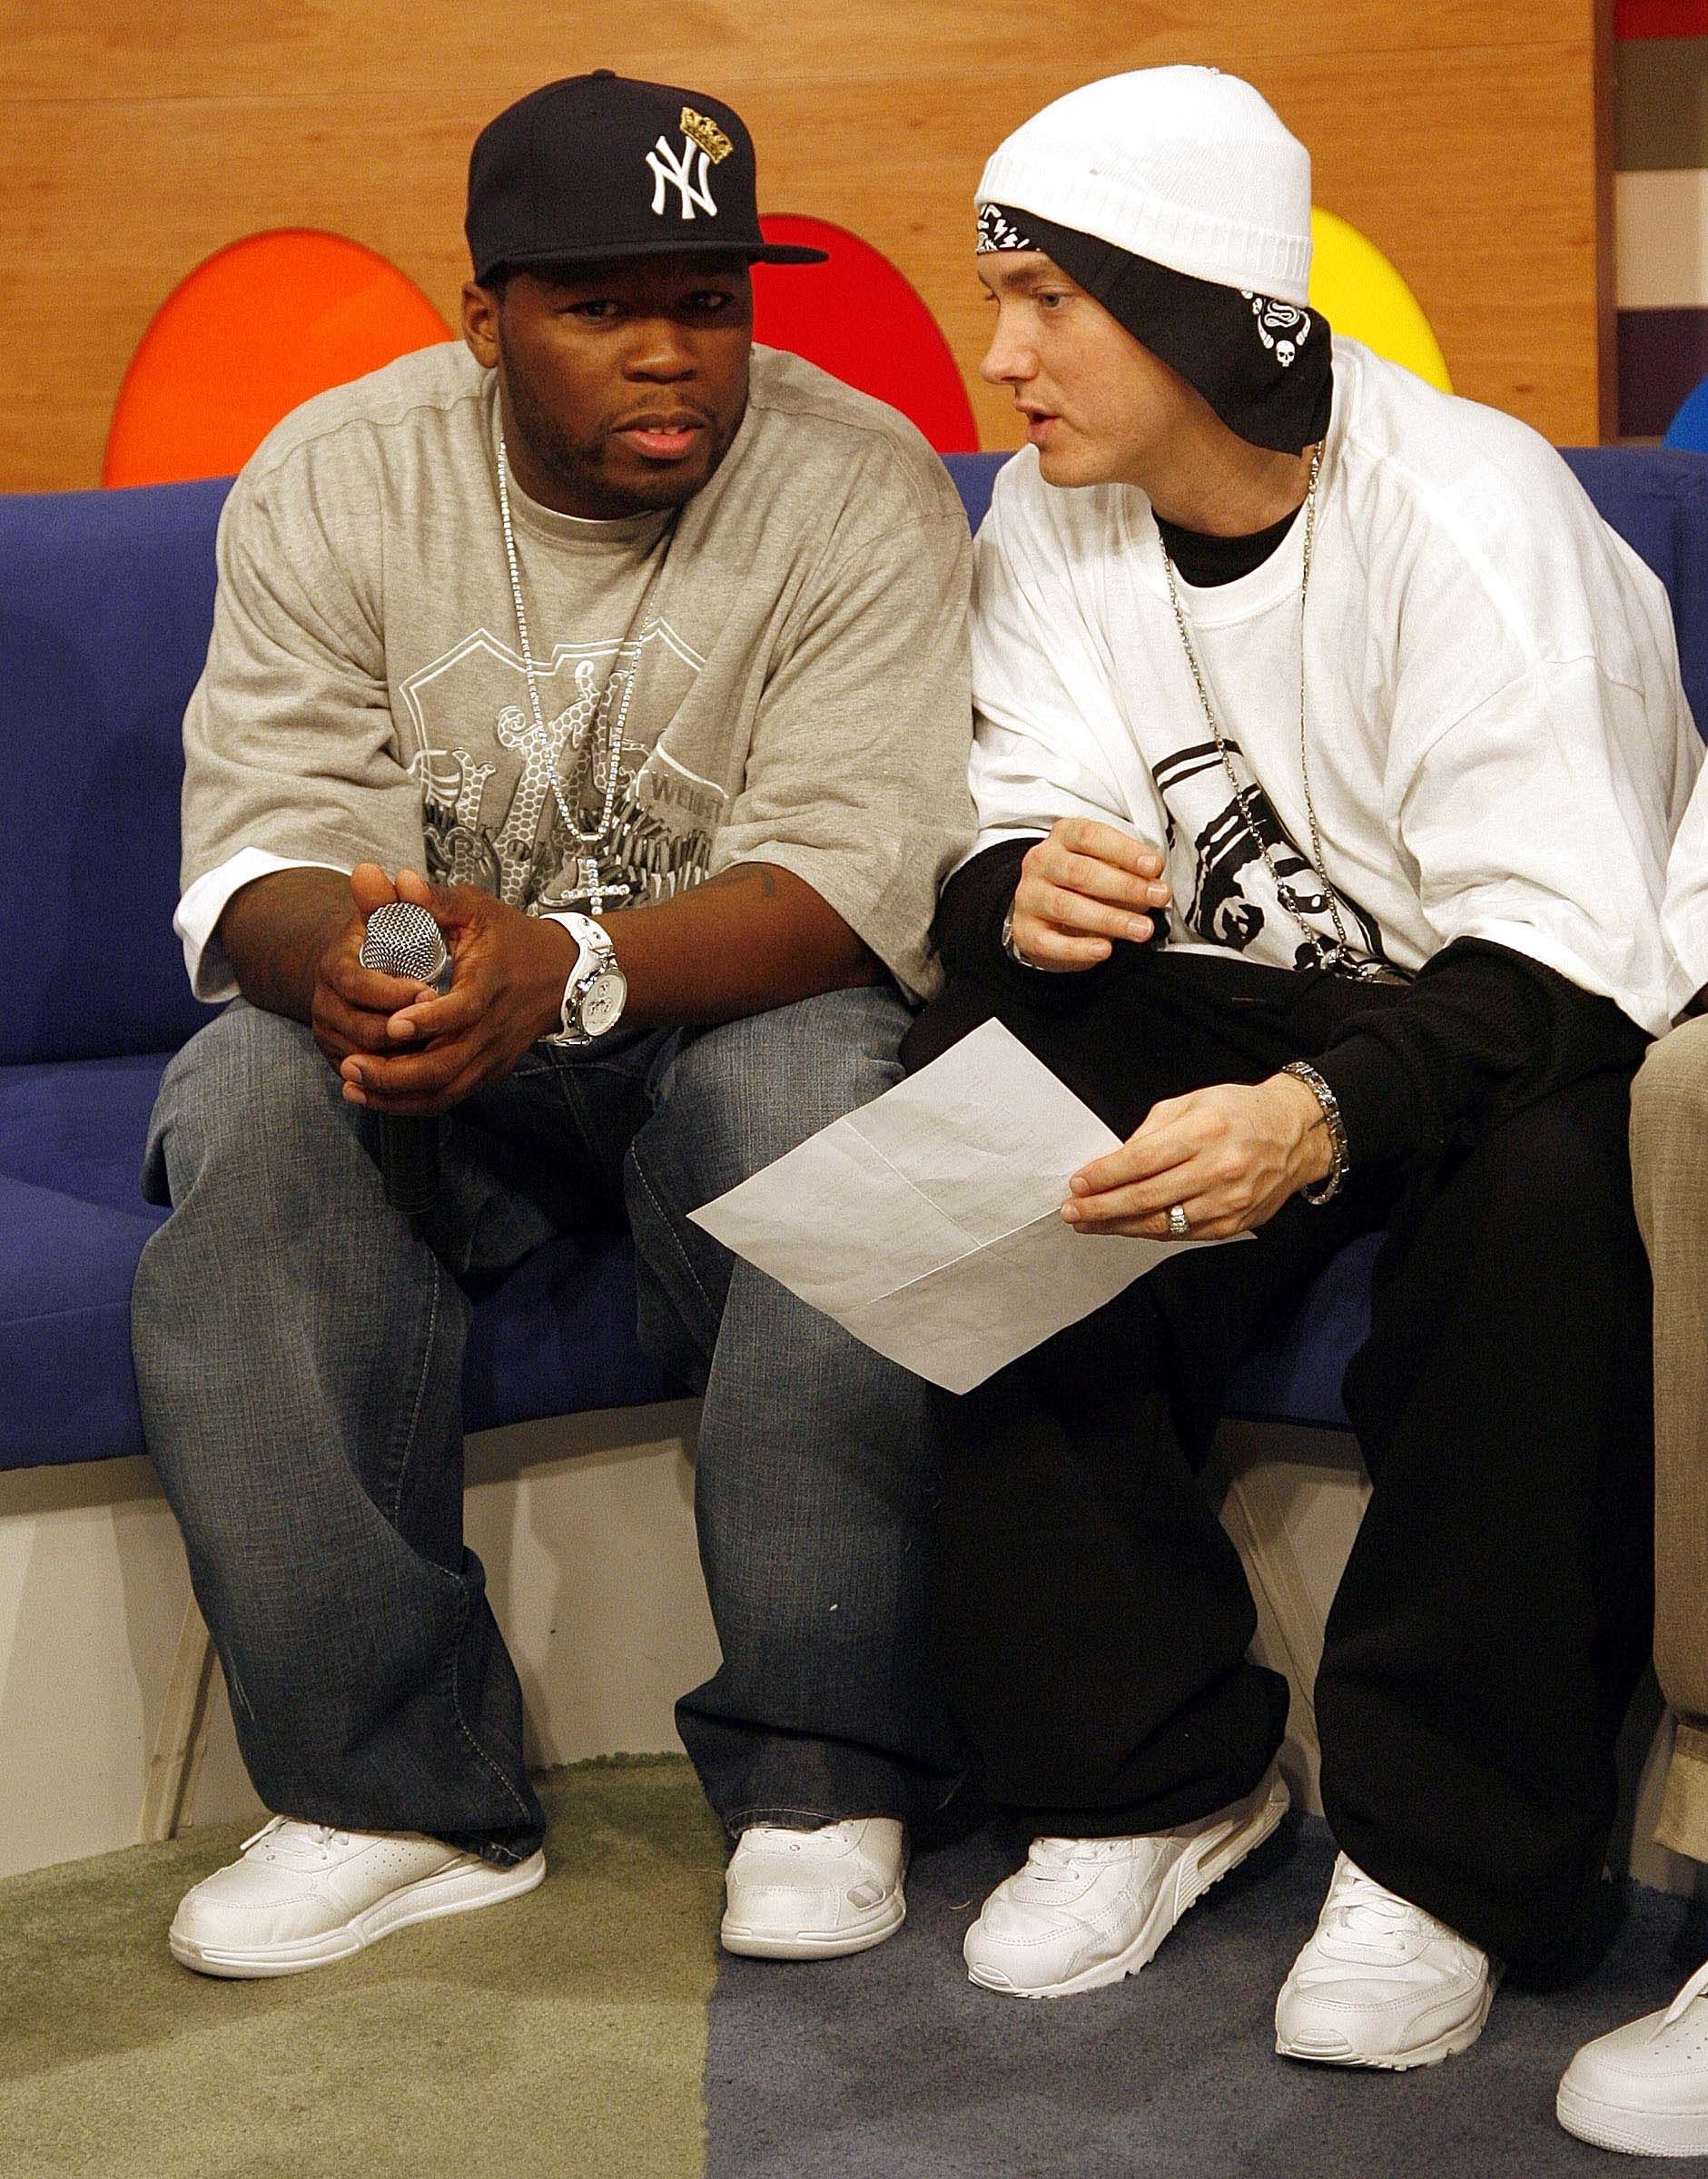 Eminem And 50 Cent Are Working On A TV Series Inspired By The 8 Mile Film